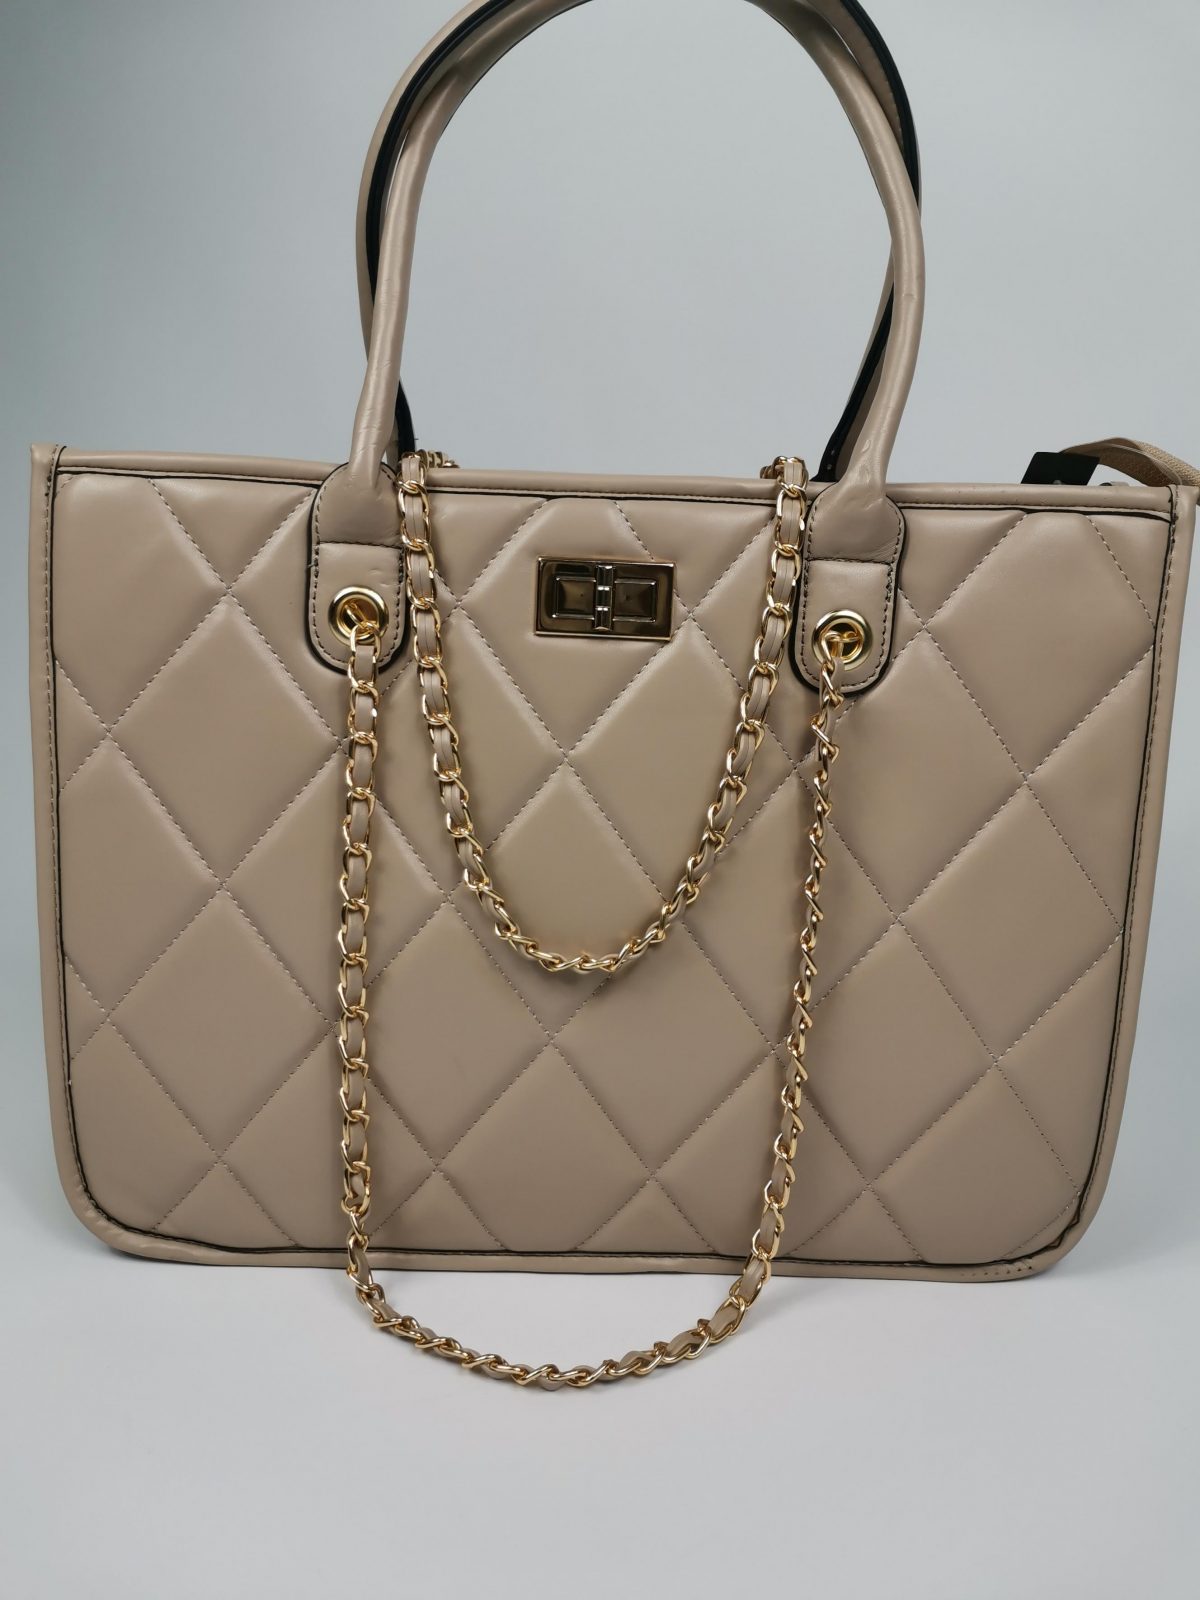 Large handbag in beige with gold chain